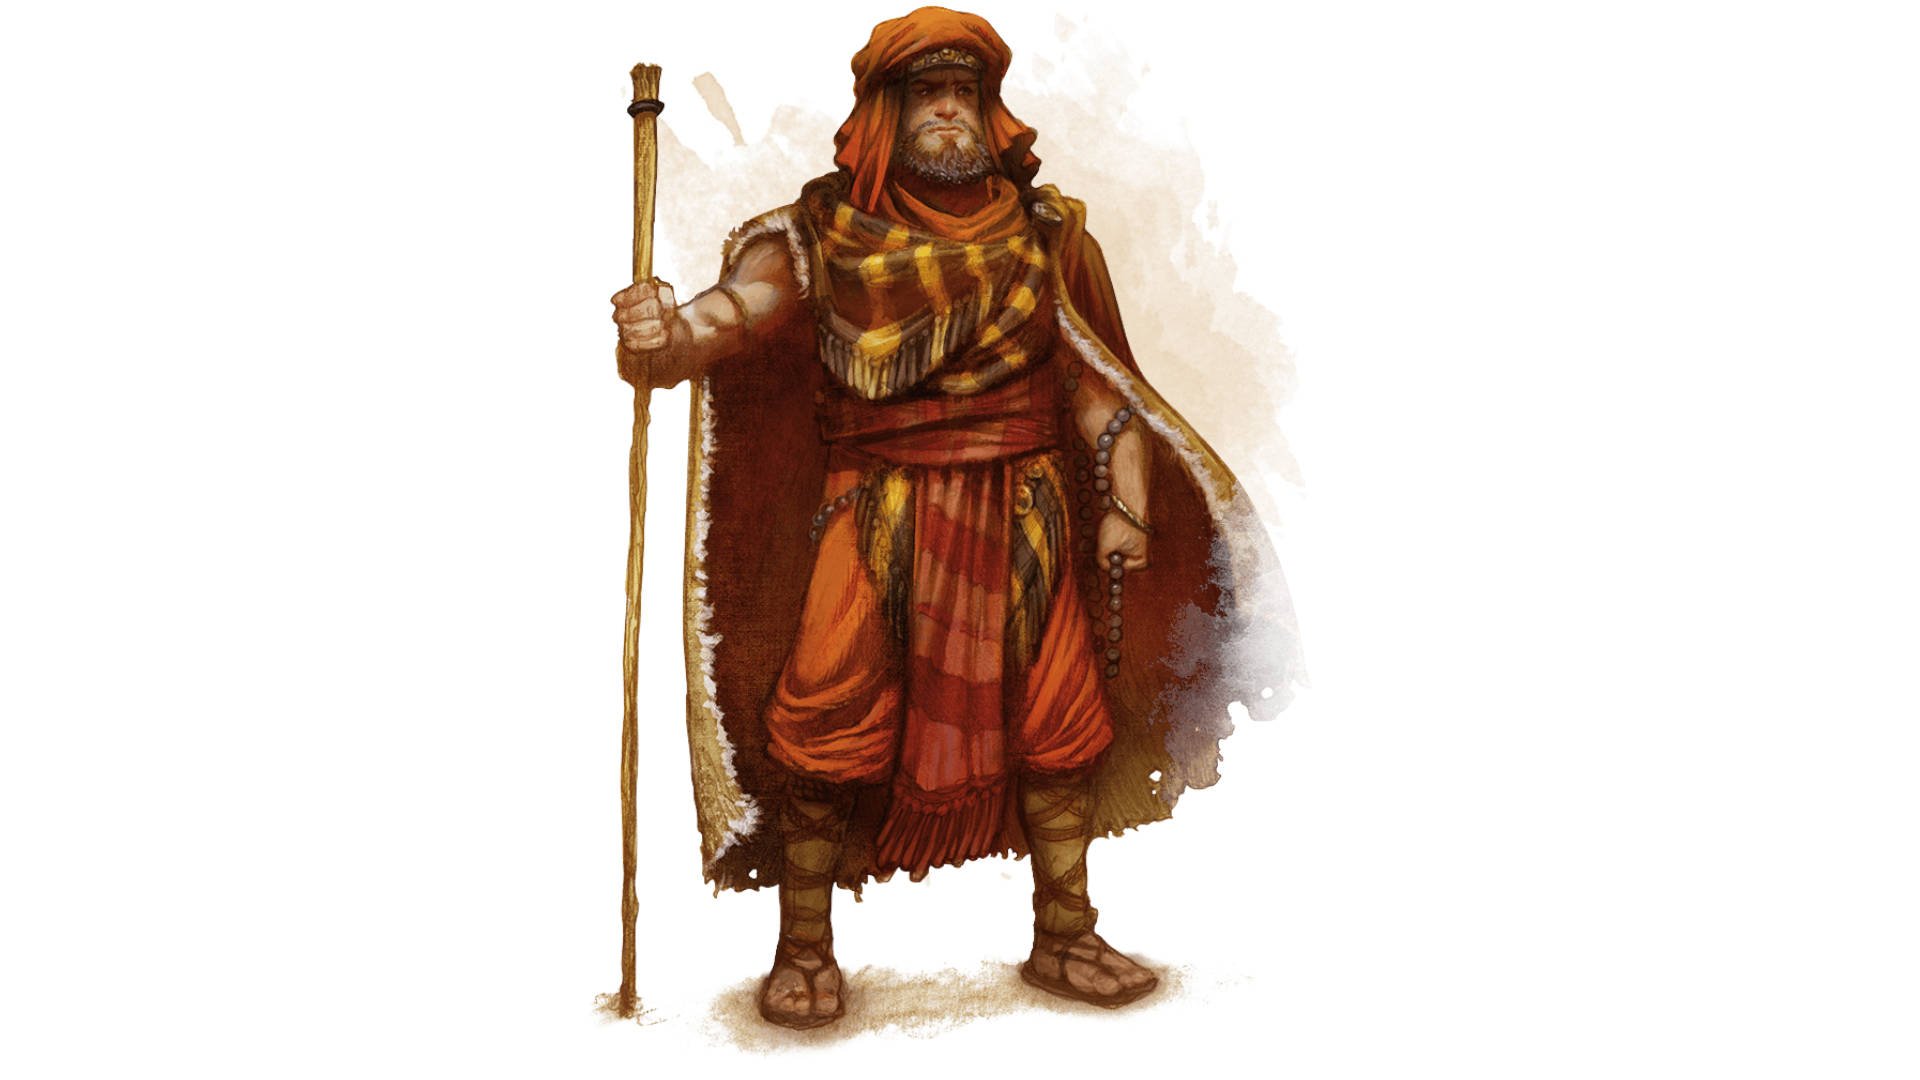 DnD Monk 5E - Wizards of the Coast art of a human wearing robes and holding a staff